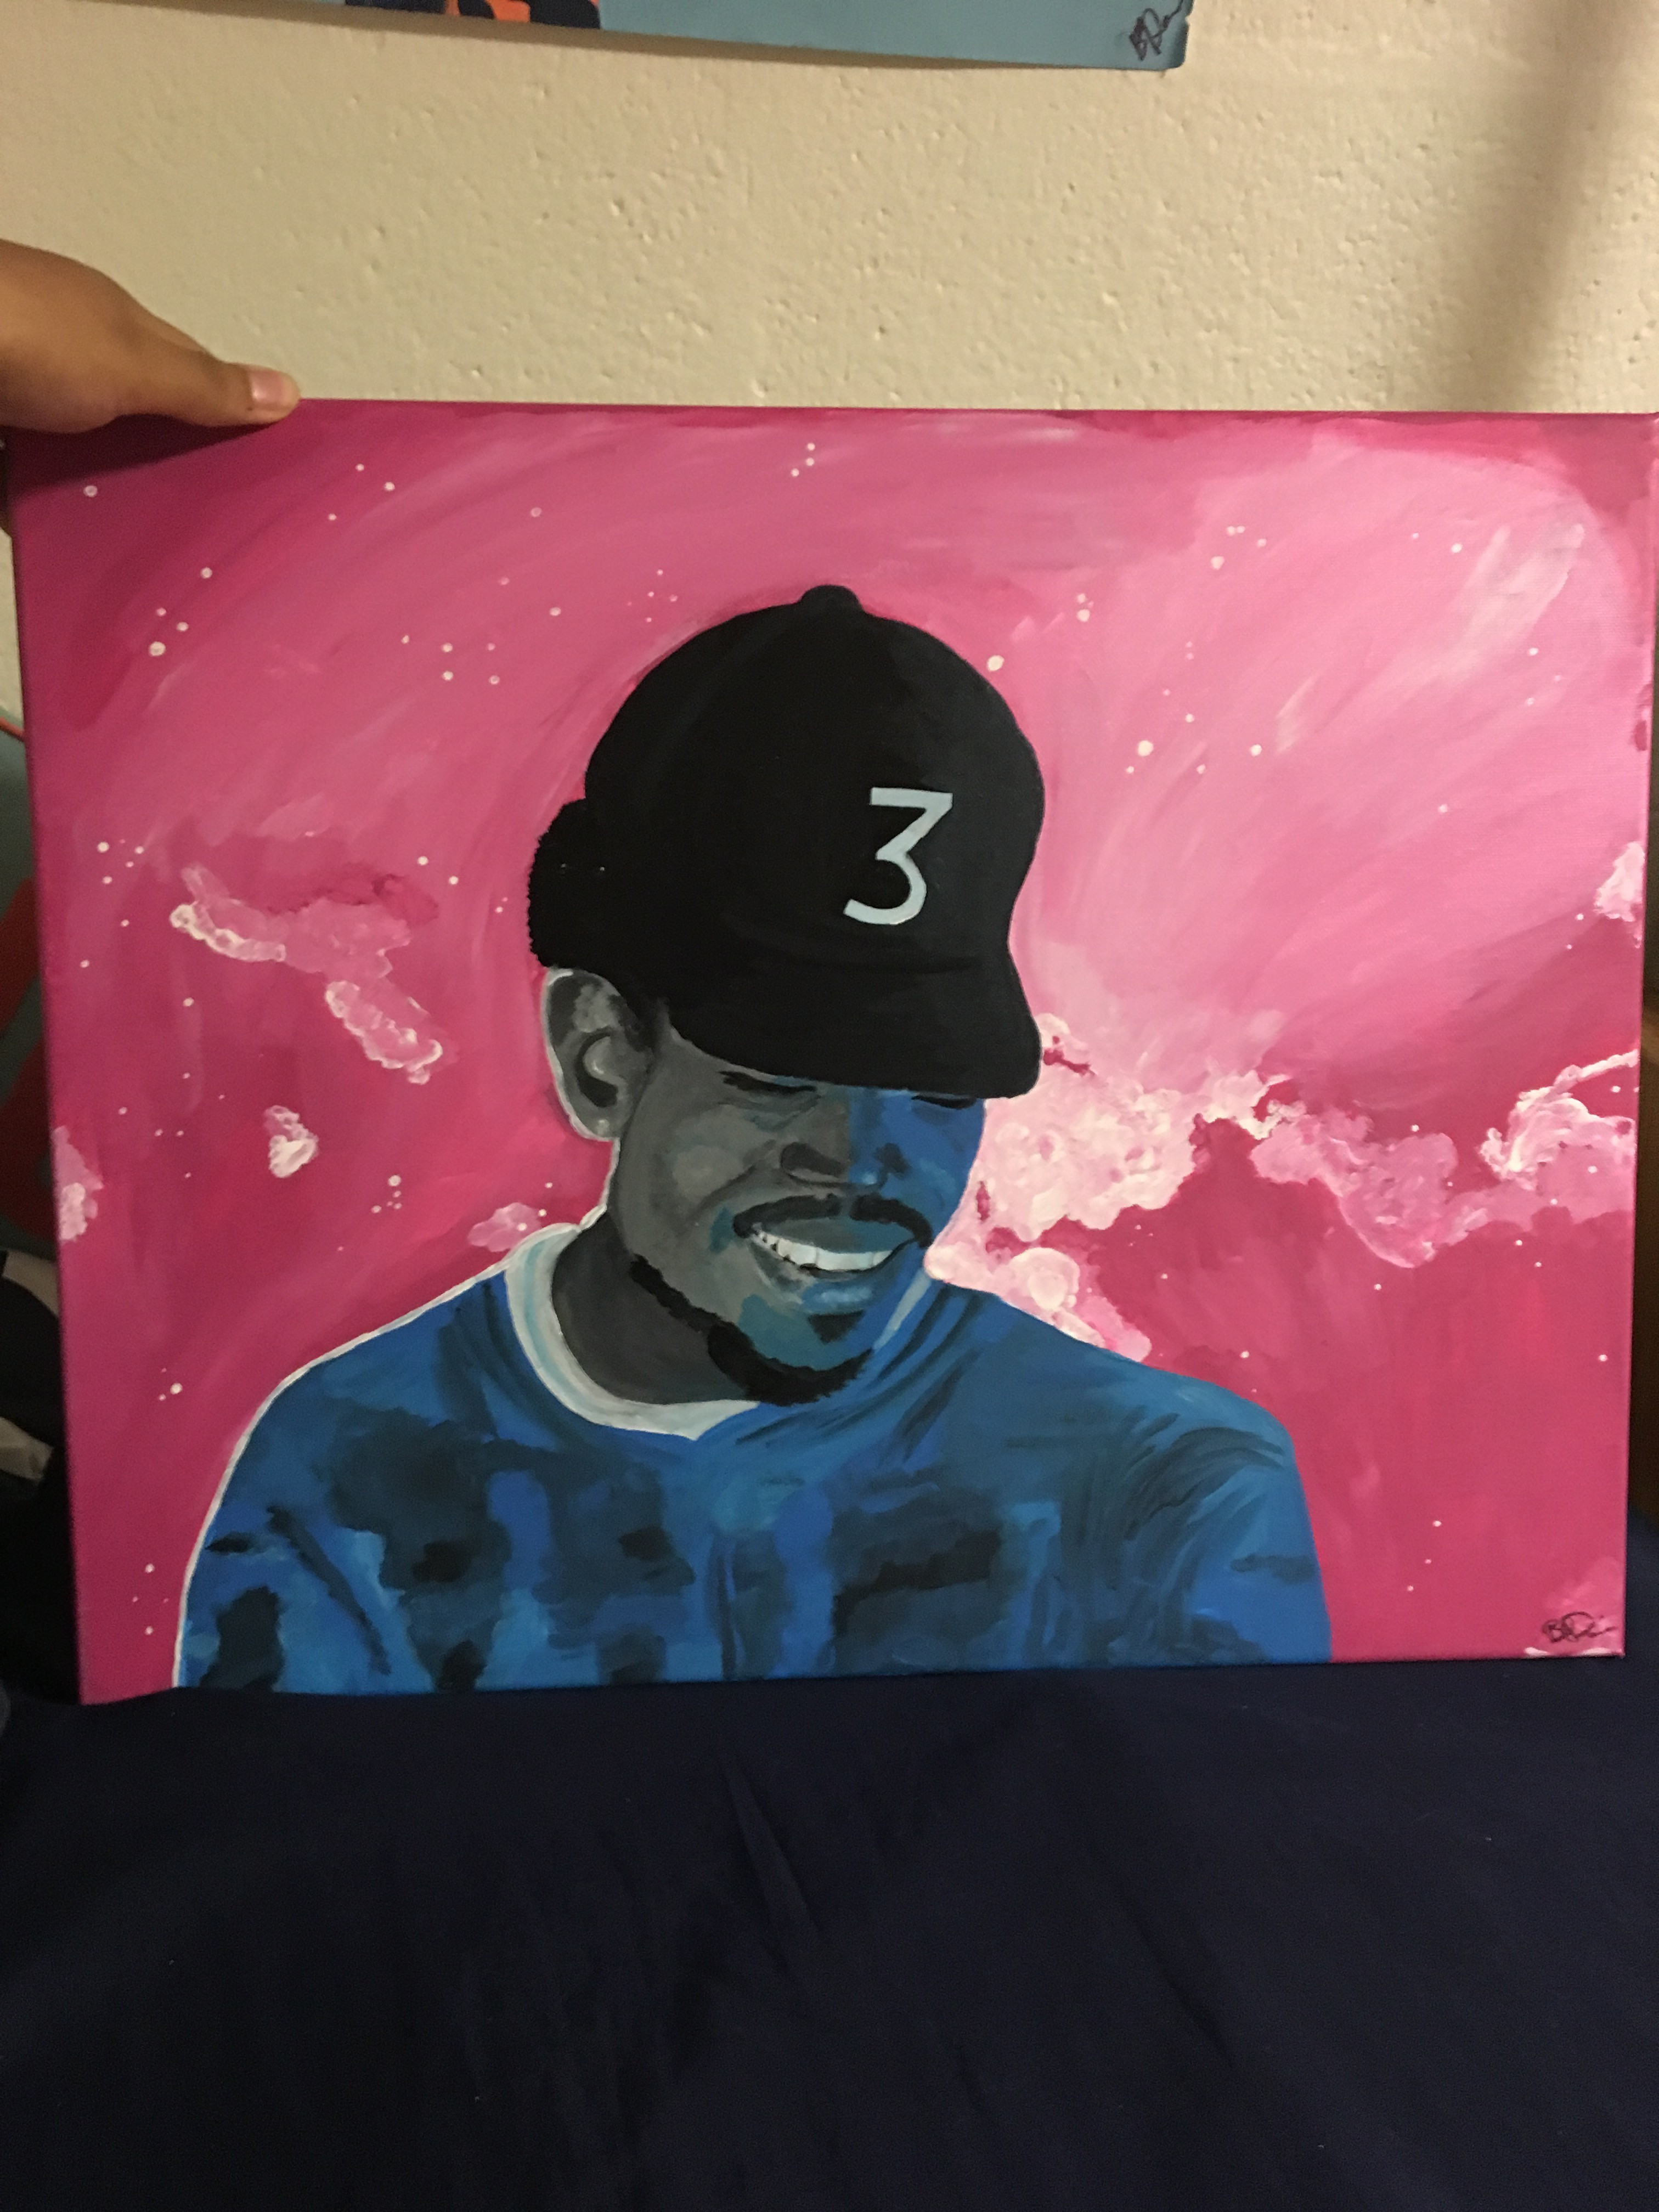 Coloring Book Album Cover
 Chance the Rapper Coloring Book mixtape cover